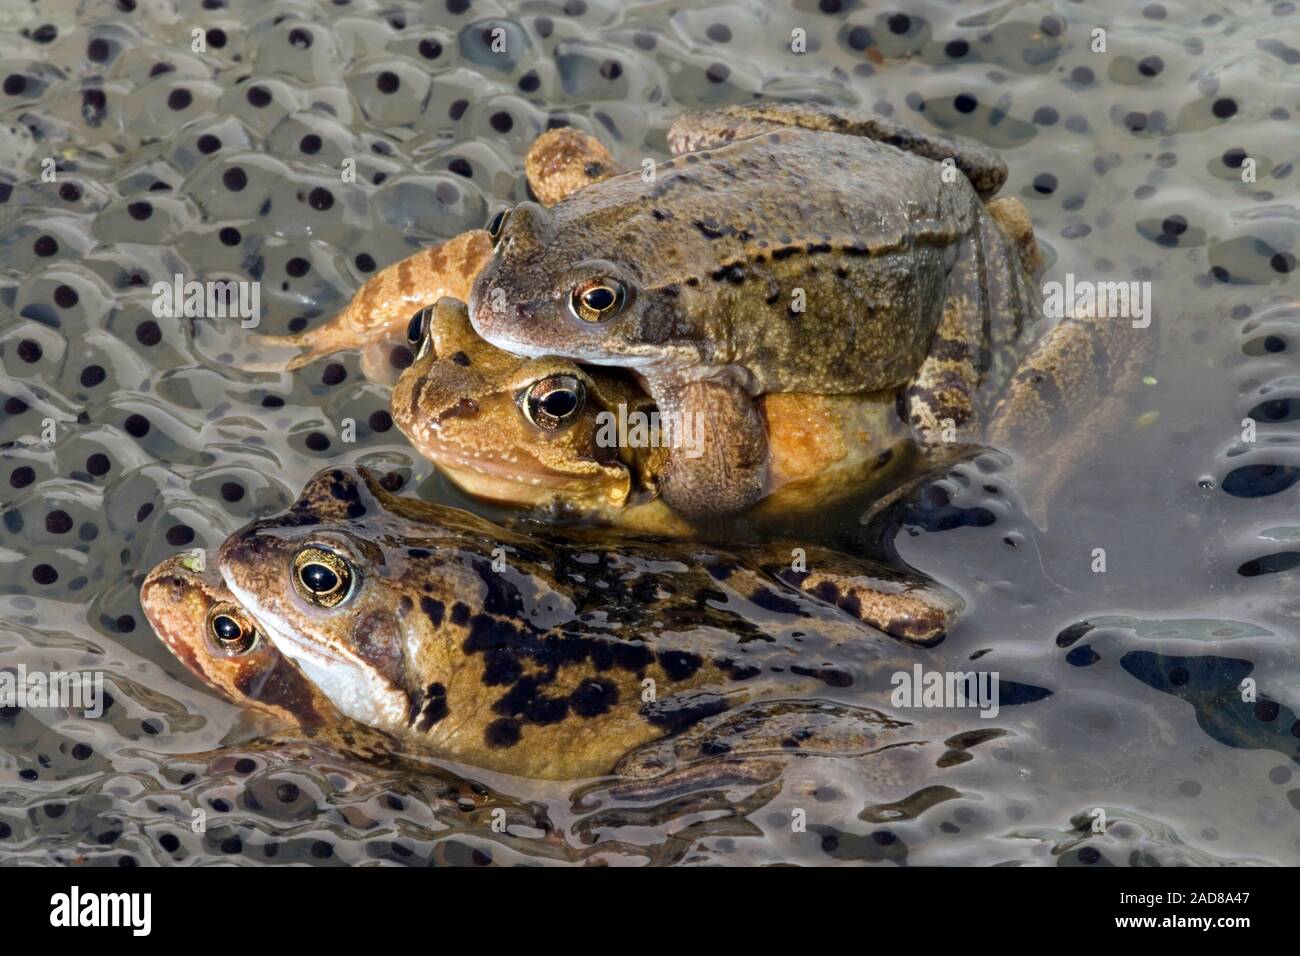 COMMON FROGS (Rana temporaria). Two pairs in amplexus amidst frog spawn, lai by others in a garden pond. Spring. UK. Stock Photo